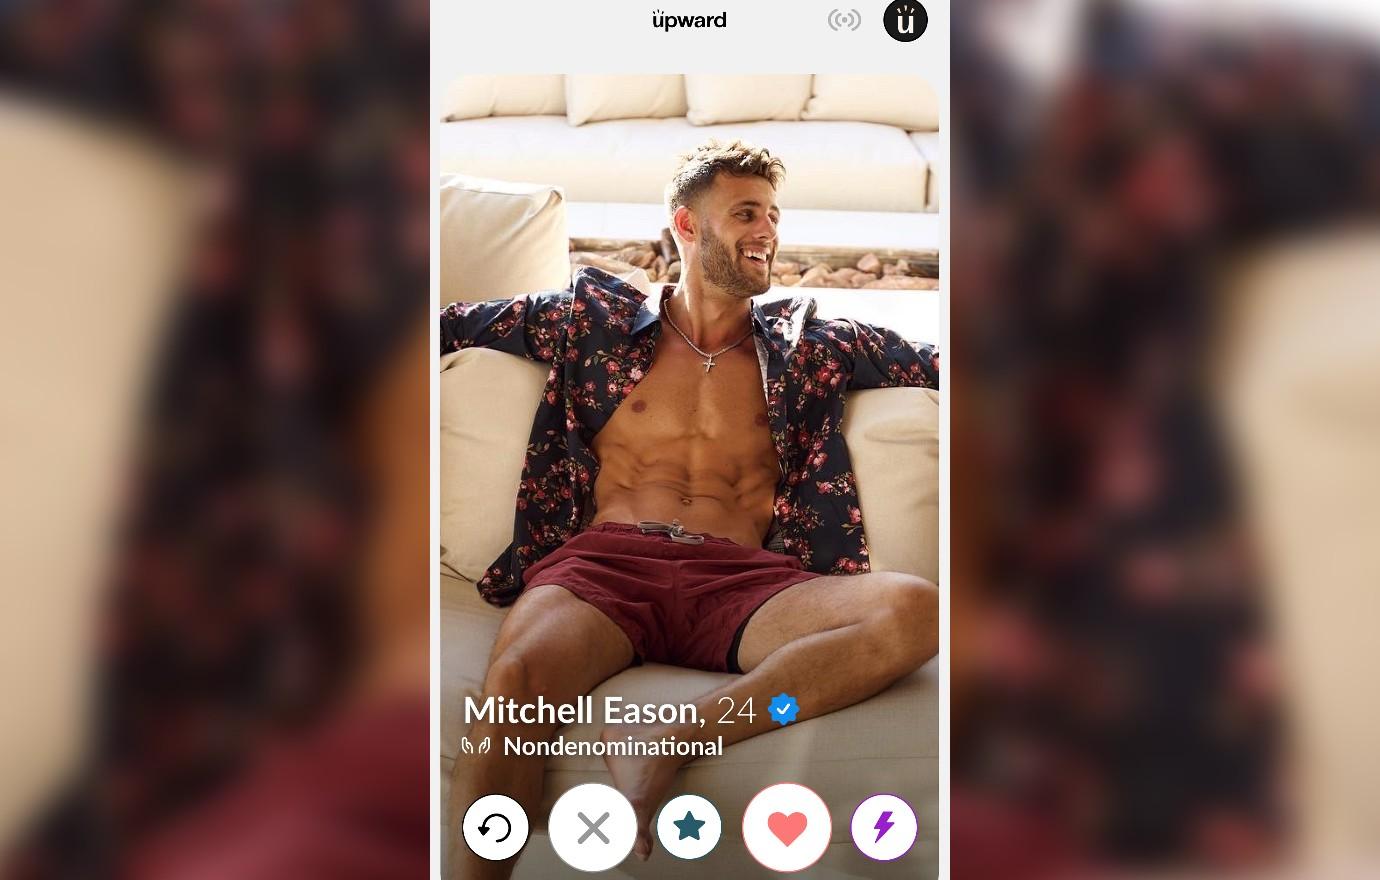 Mitchell Eason Learned He 'Self-Sabotages' In Relationships